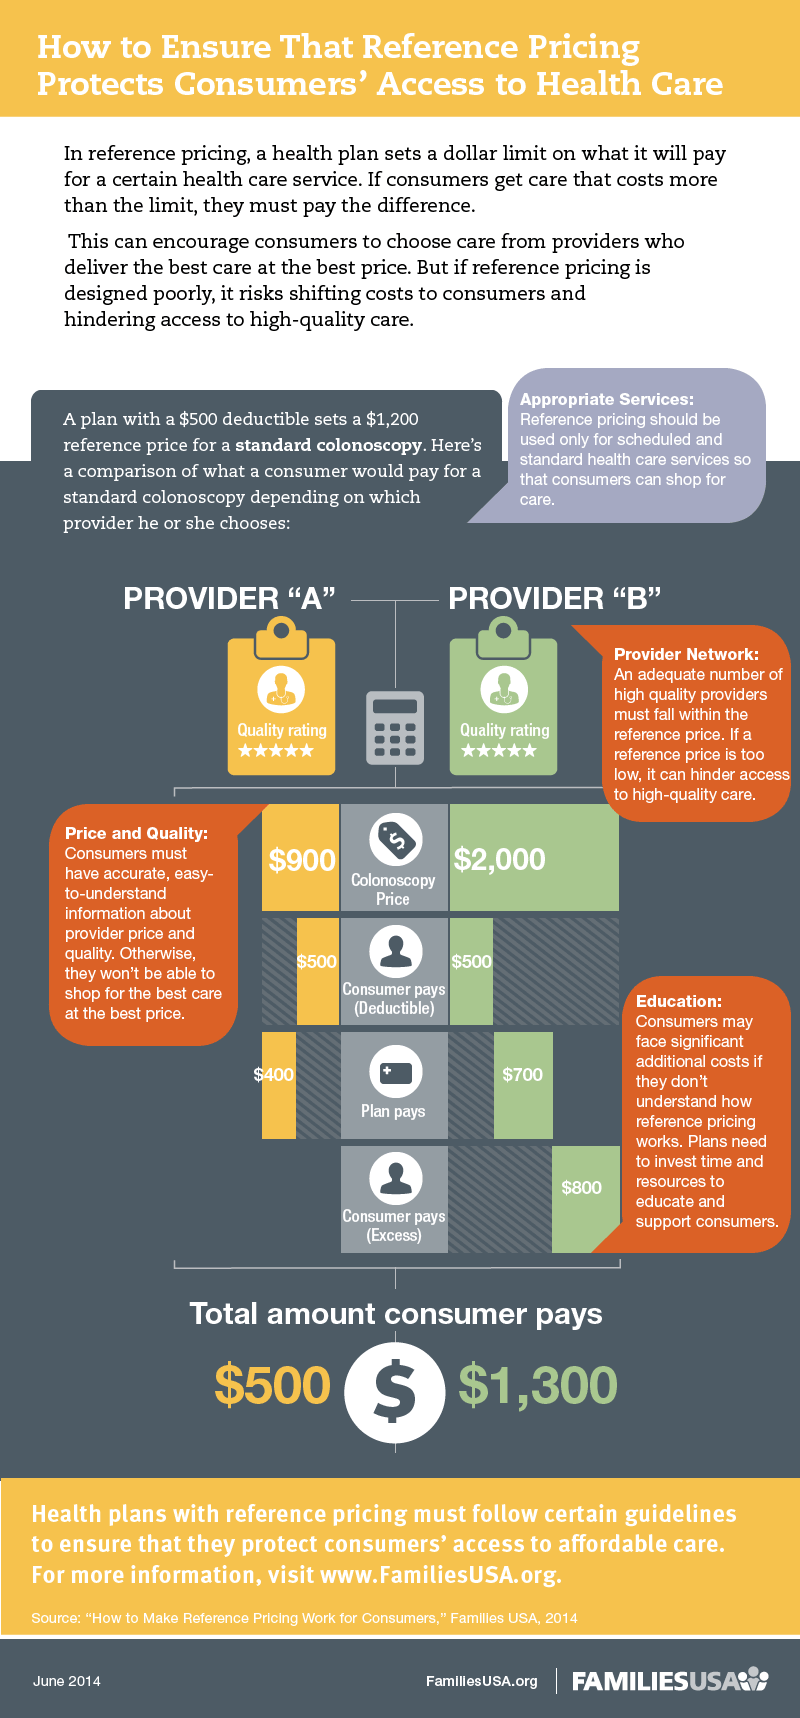 https://familiesusa.org/wp-content/uploads/2019/09/HSI-Consumer-Reference-Pricing_Infographic_final.png